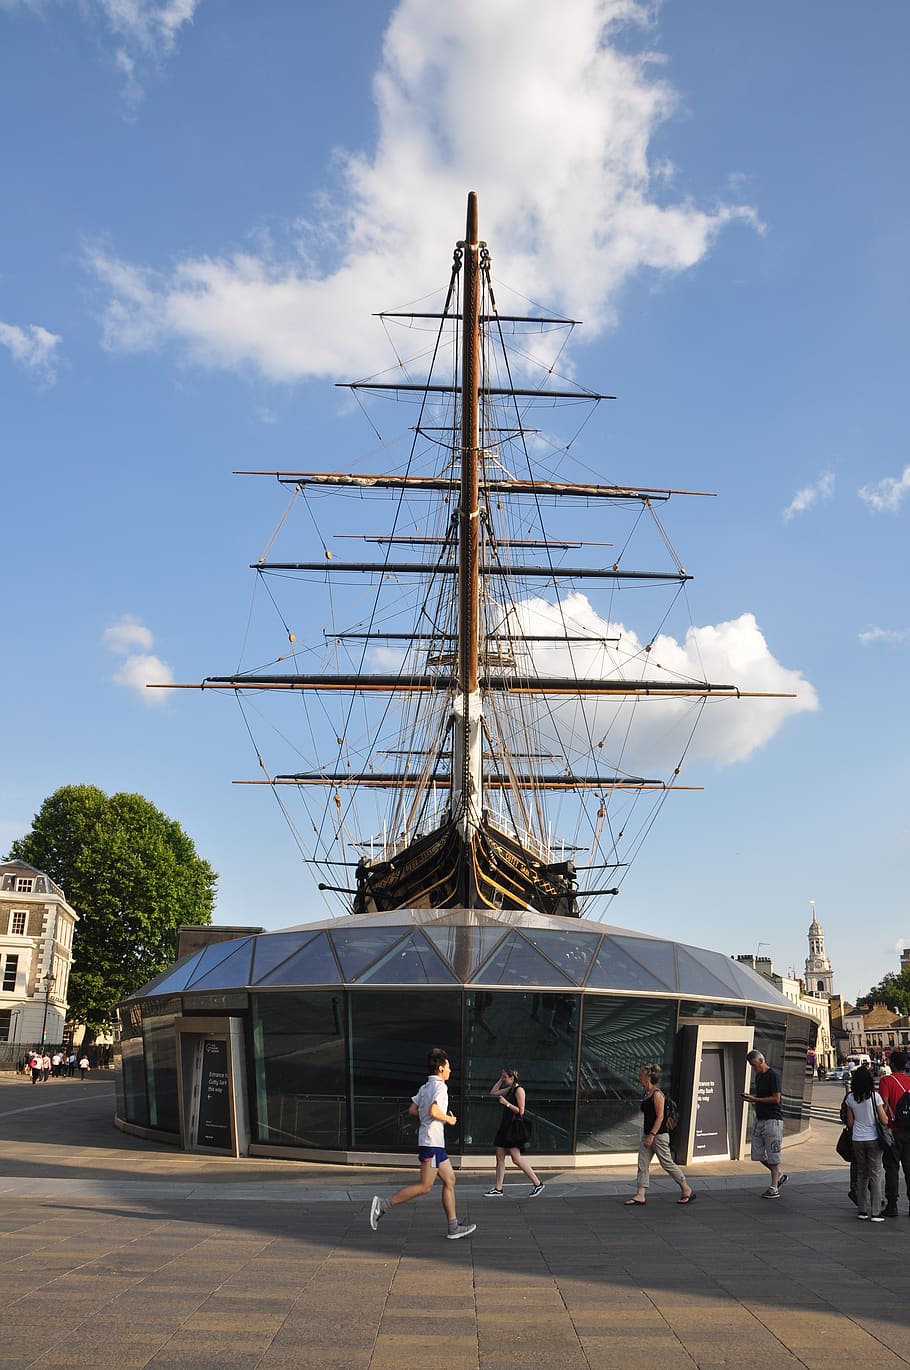 cuttysark, greenwich, maritime, shipping, london, tourist, sky, group of people, cloud - sky, architecture